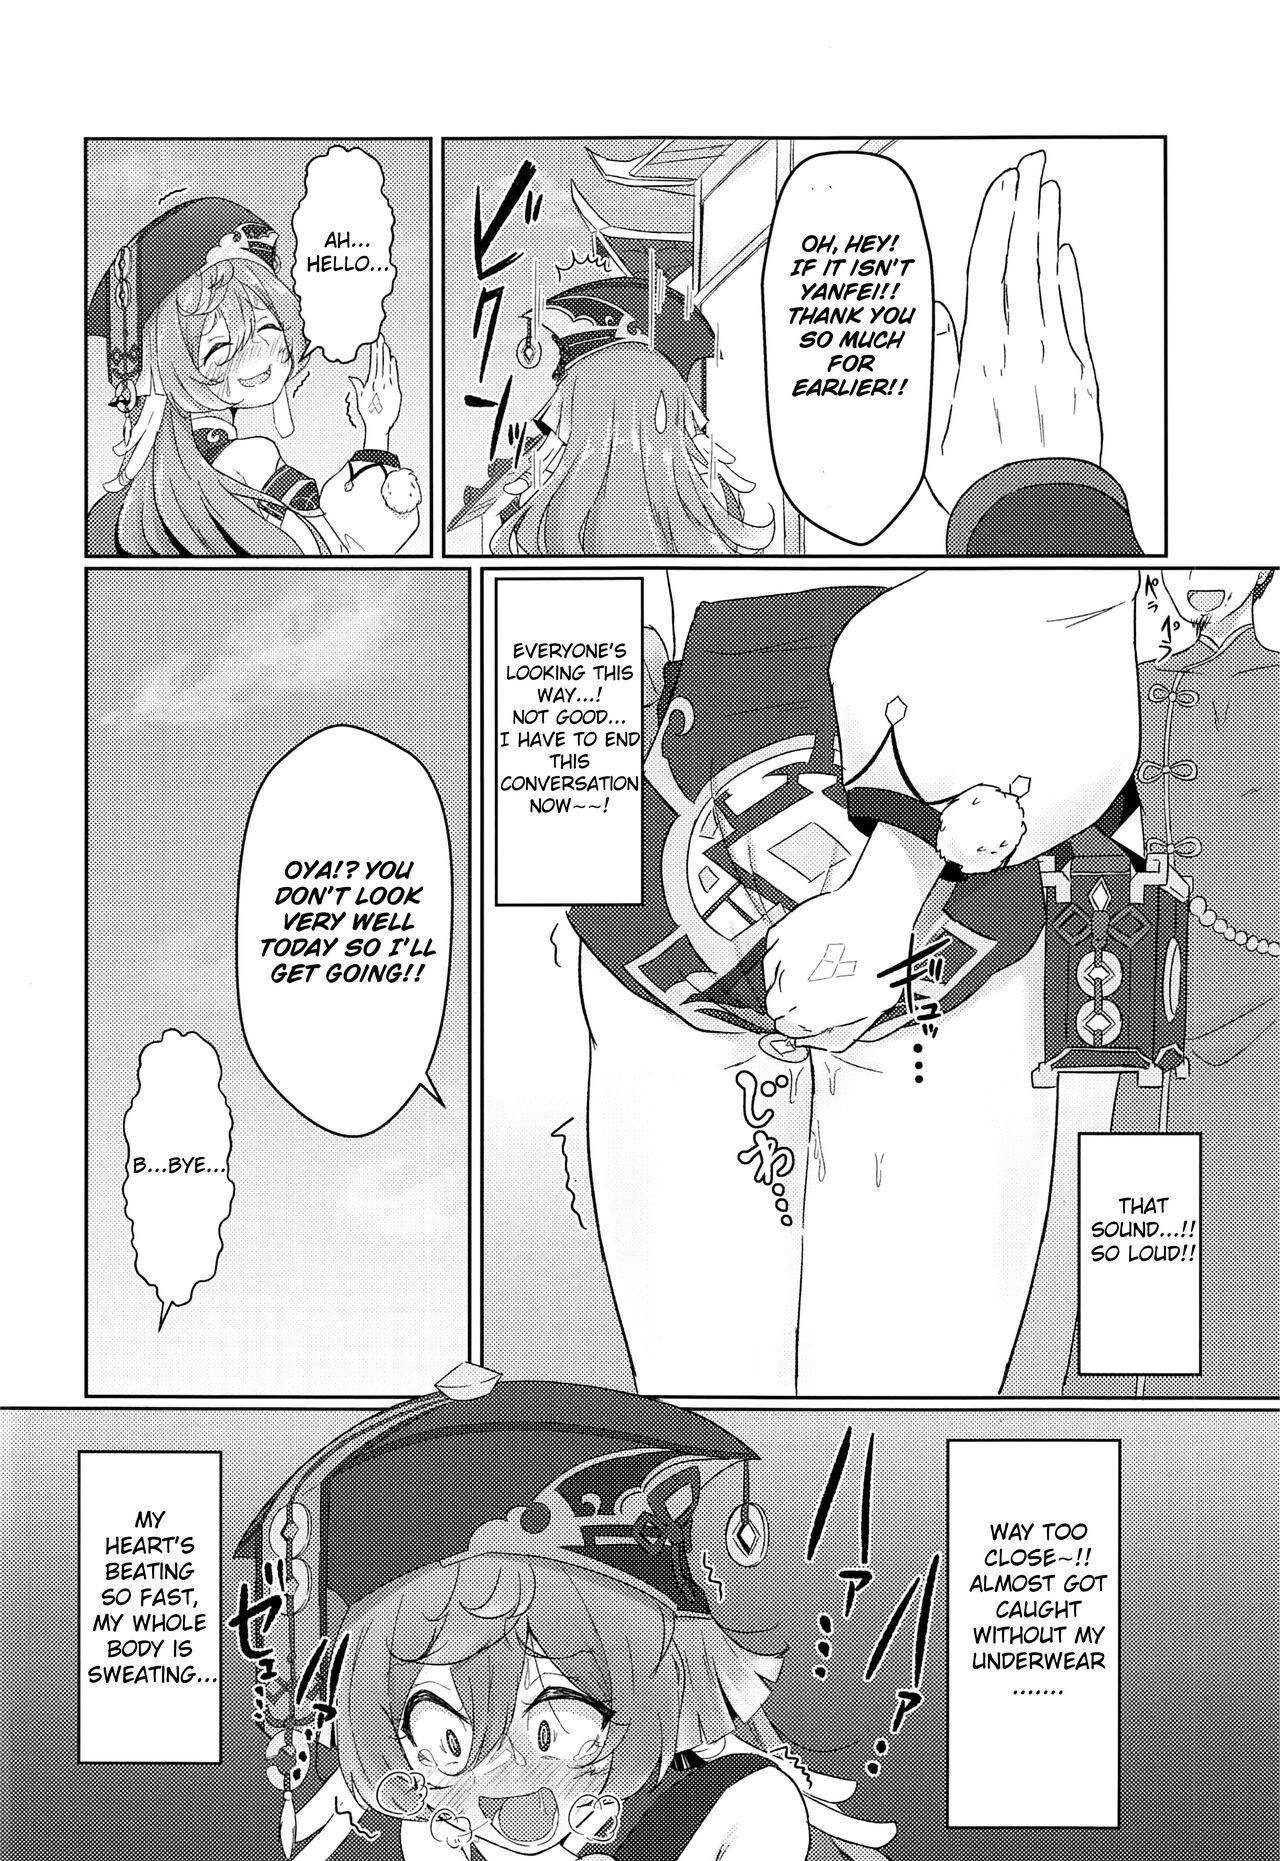 Shorts It's Against The Law To Expose Yourself Outdoors - Genshin impact Rough Sex - Page 5